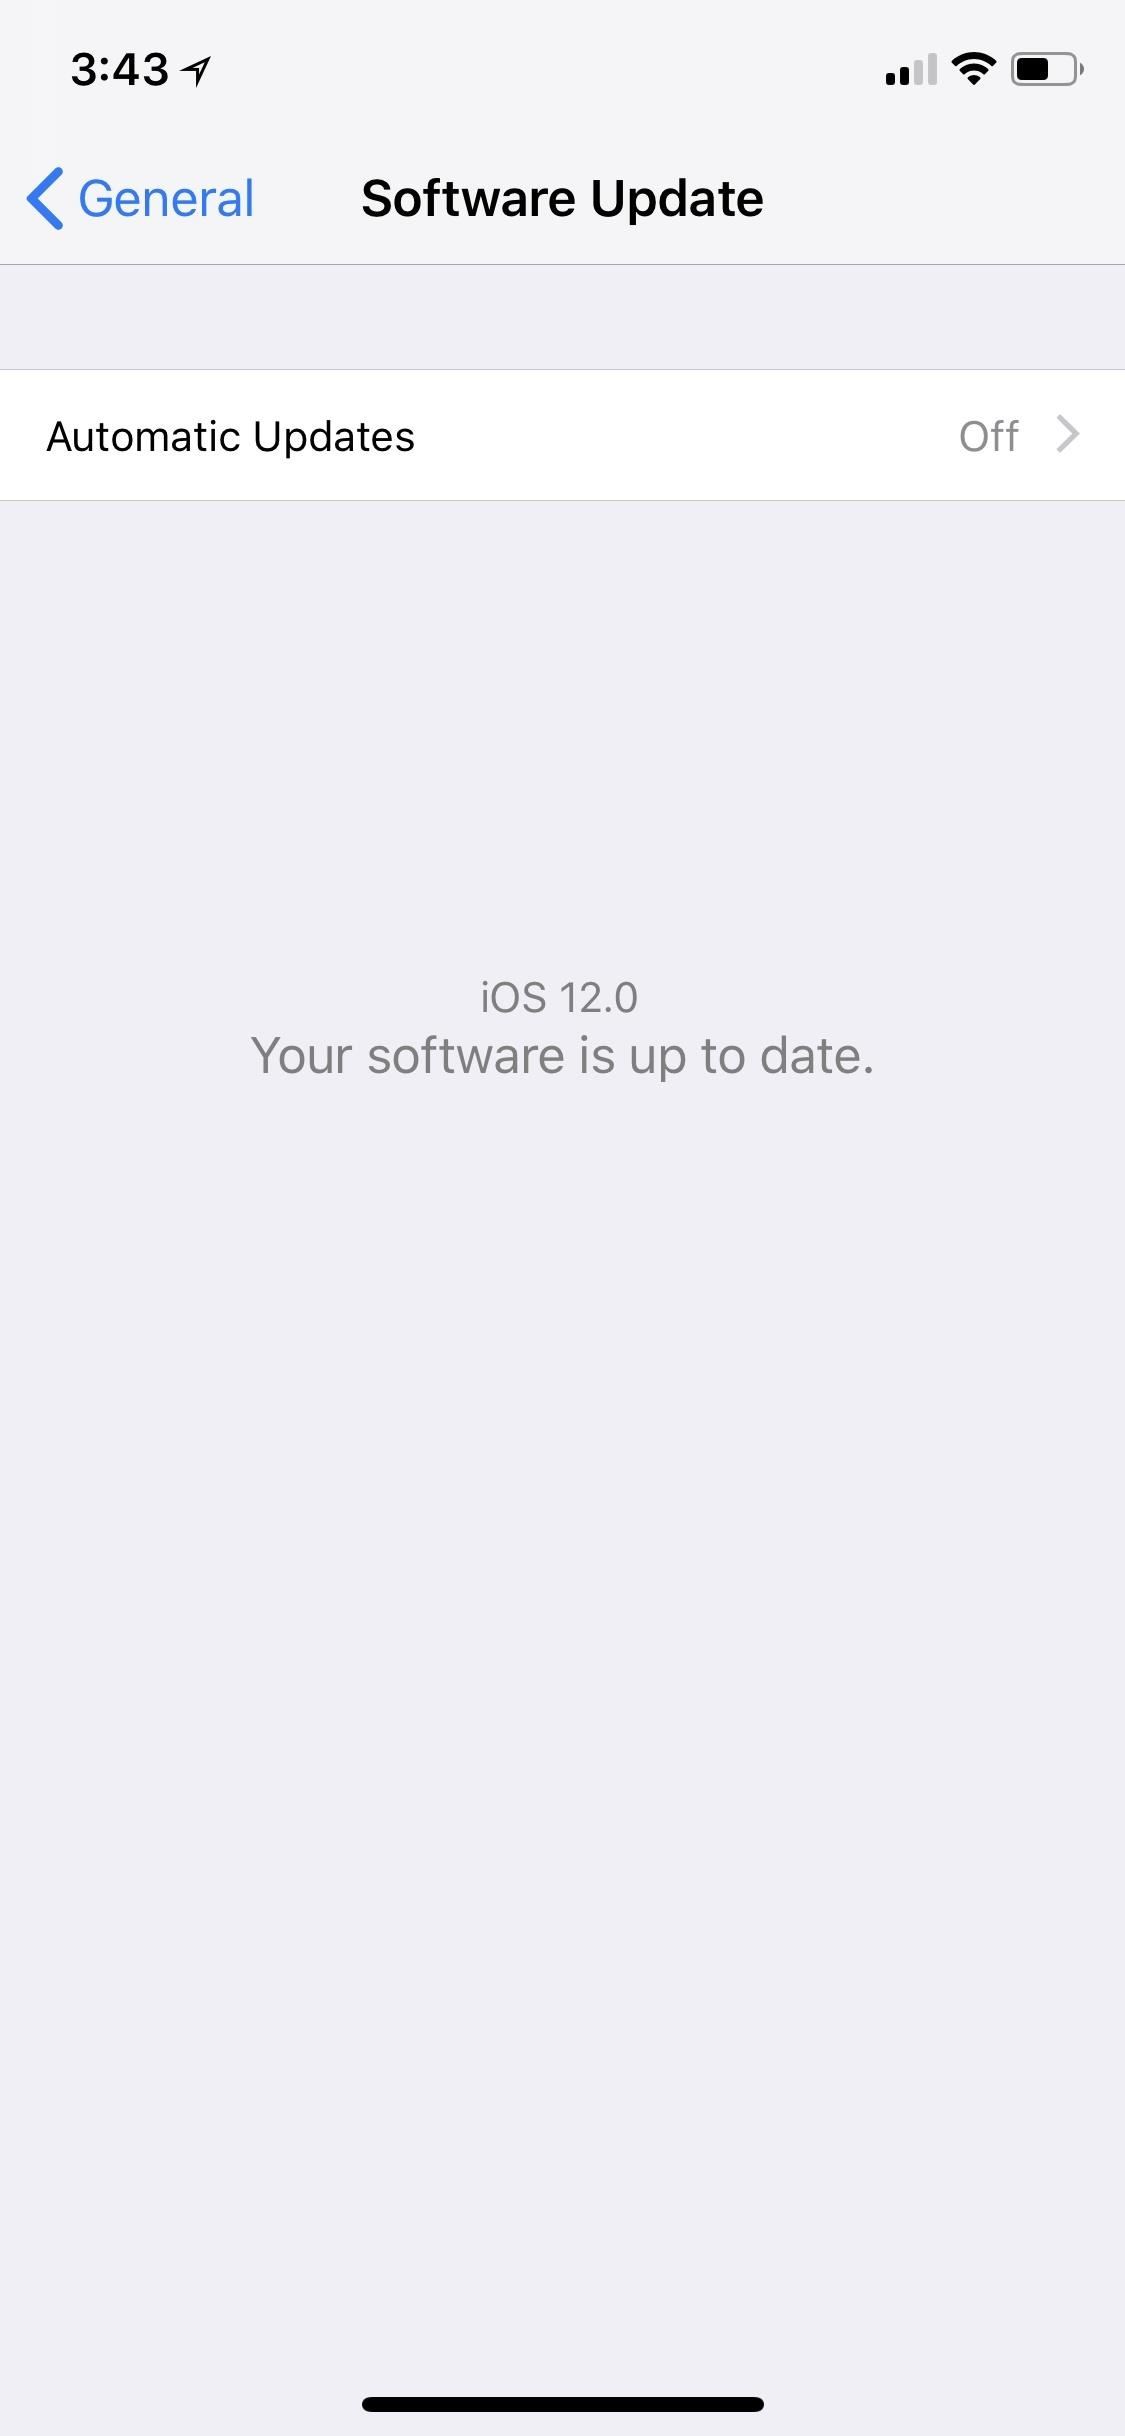 How to Make Your iPhone Automatically Download & Install New iOS Updates